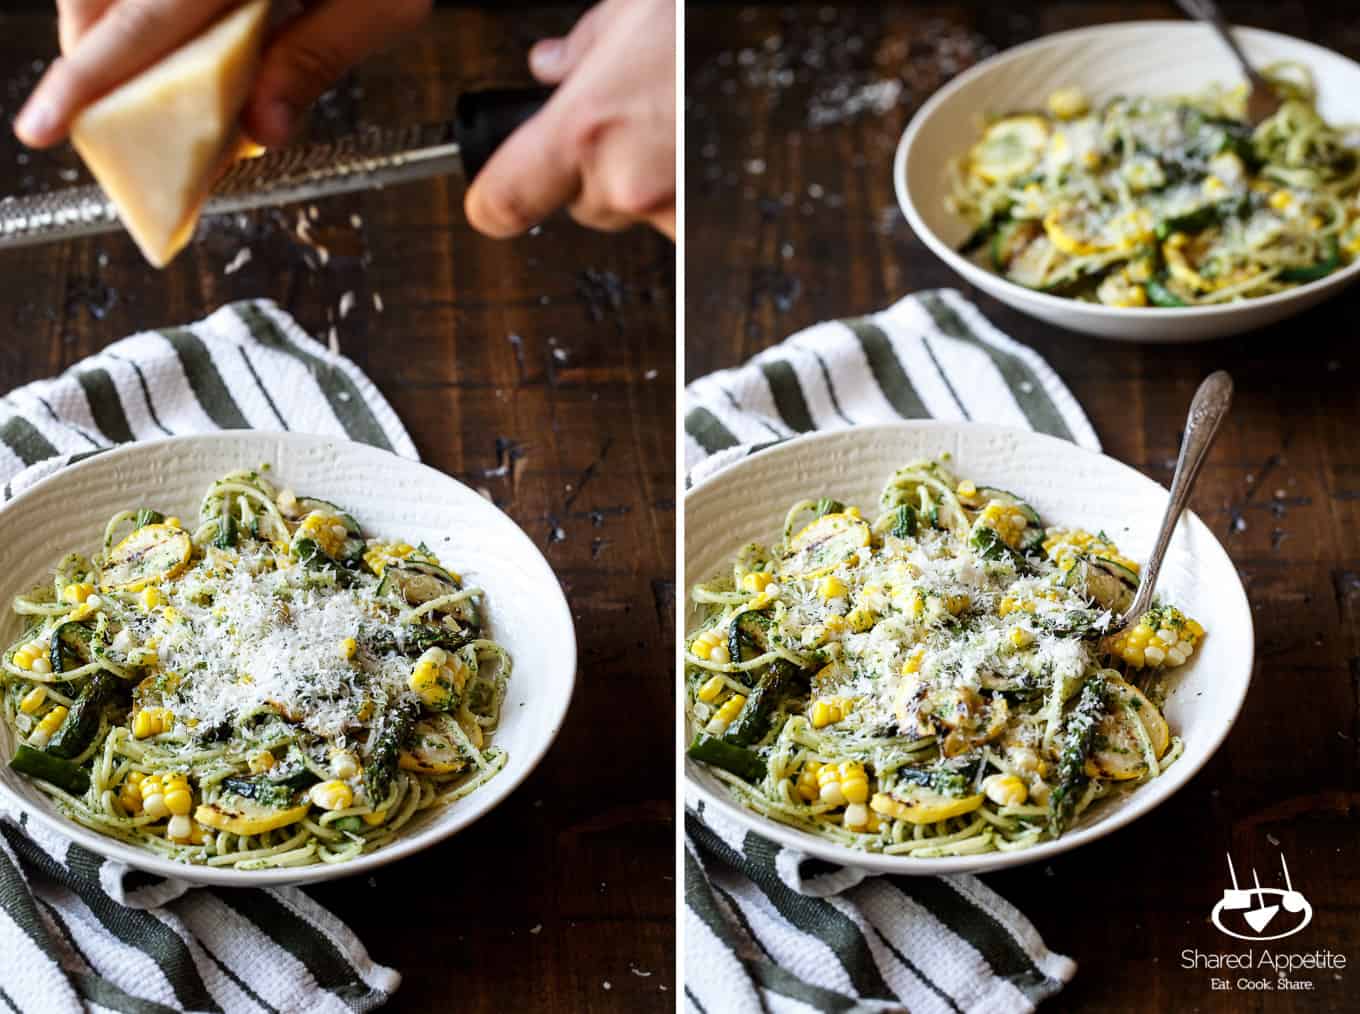 Grating Cheese on this Summer Vegetable Pasta with Arugula Pesto | sharedappetite.com